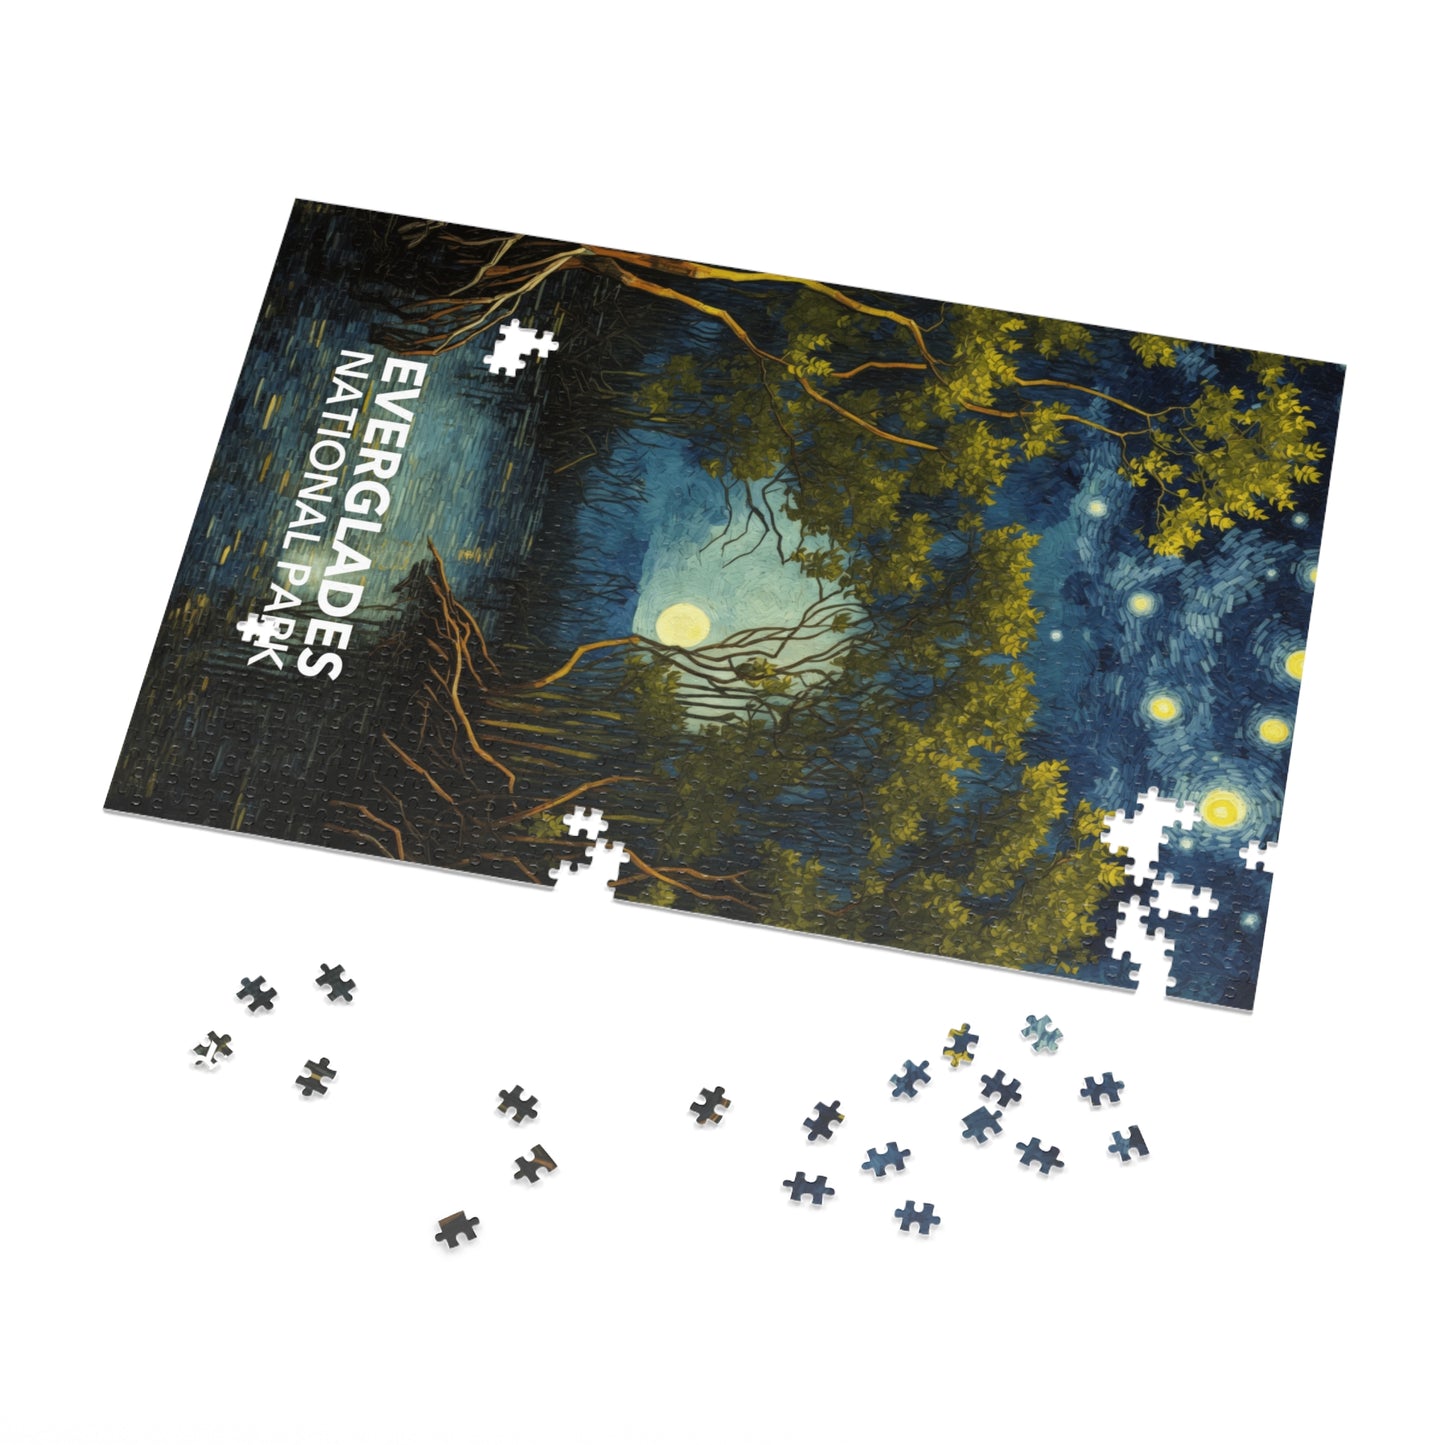 Everglades National Park Jigsaw Puzzle - The Starry Night